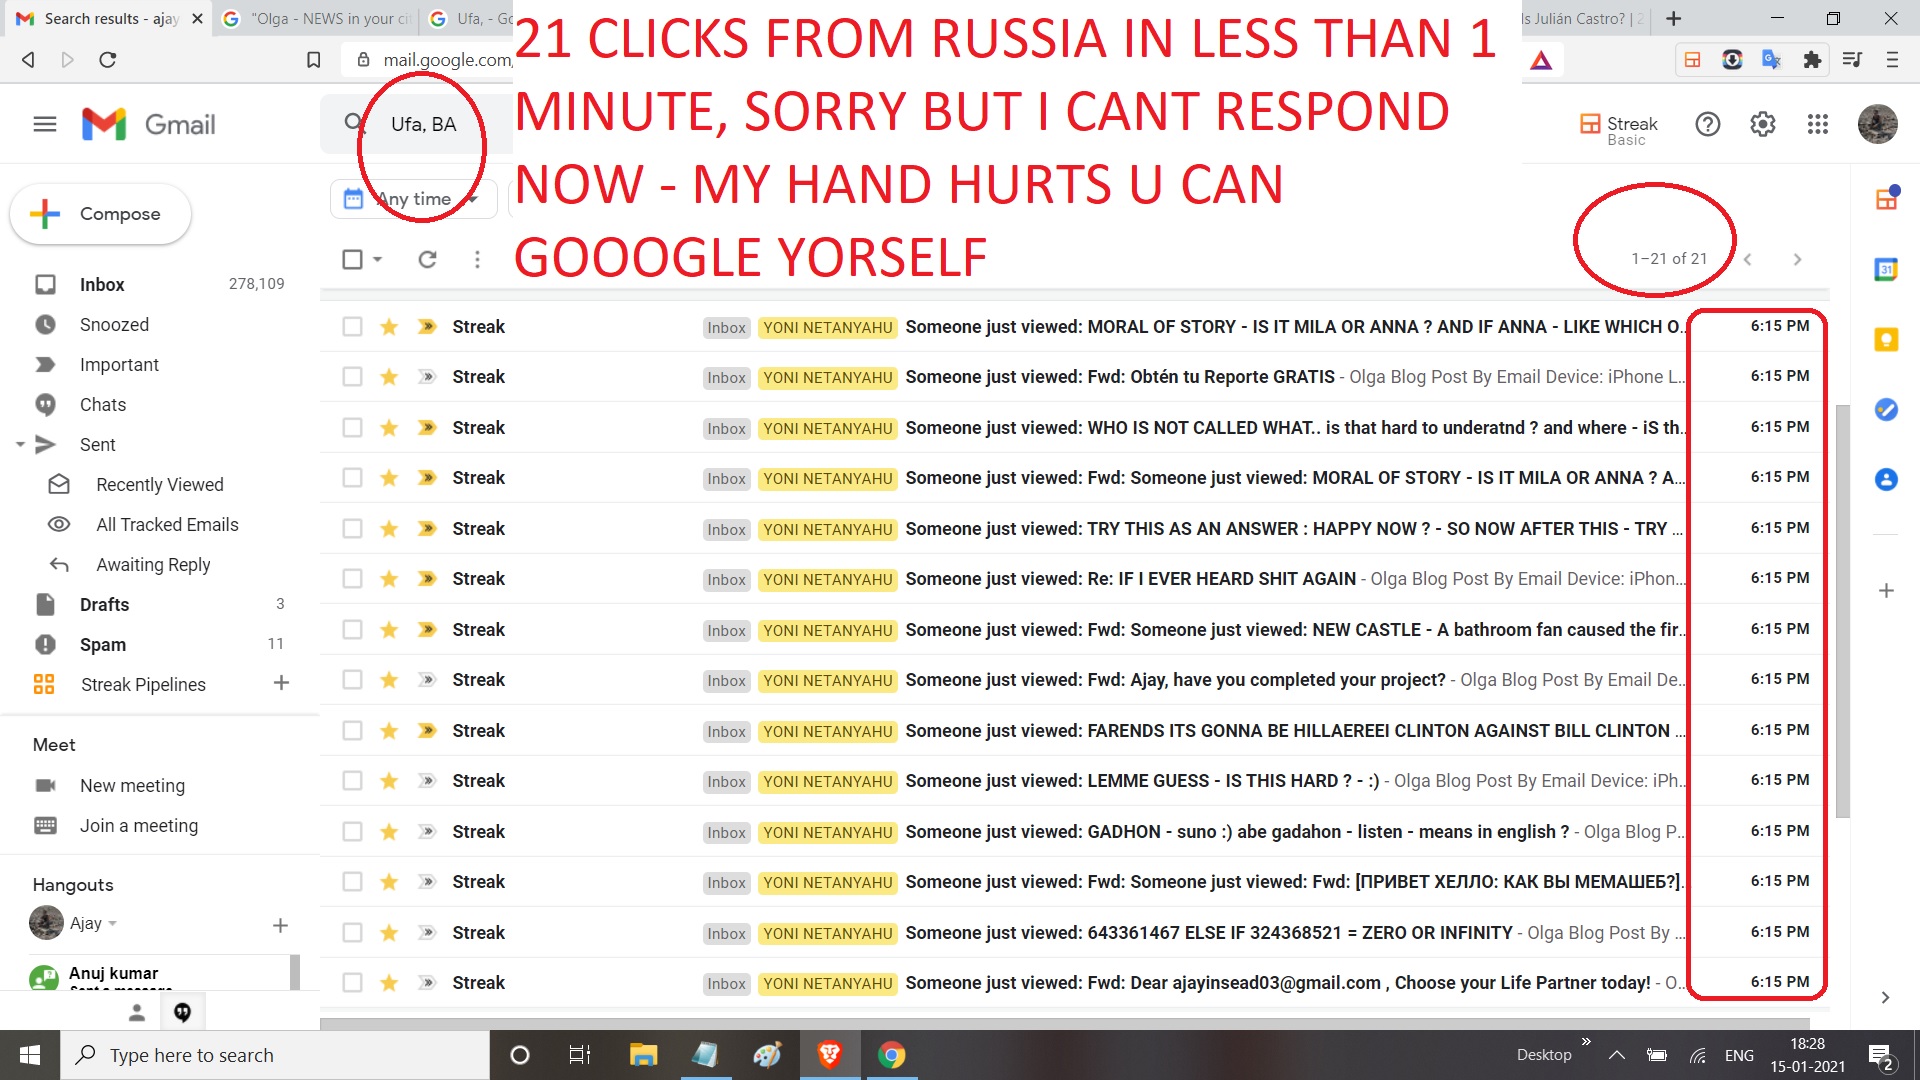 21 CLICKS FROM RUSSIA IN LESS THAN 1 MINUTE, SORRY BUT I CANT RESPOND NOW - MY HAND HURTS U CAN GOOOGLE YORSELF